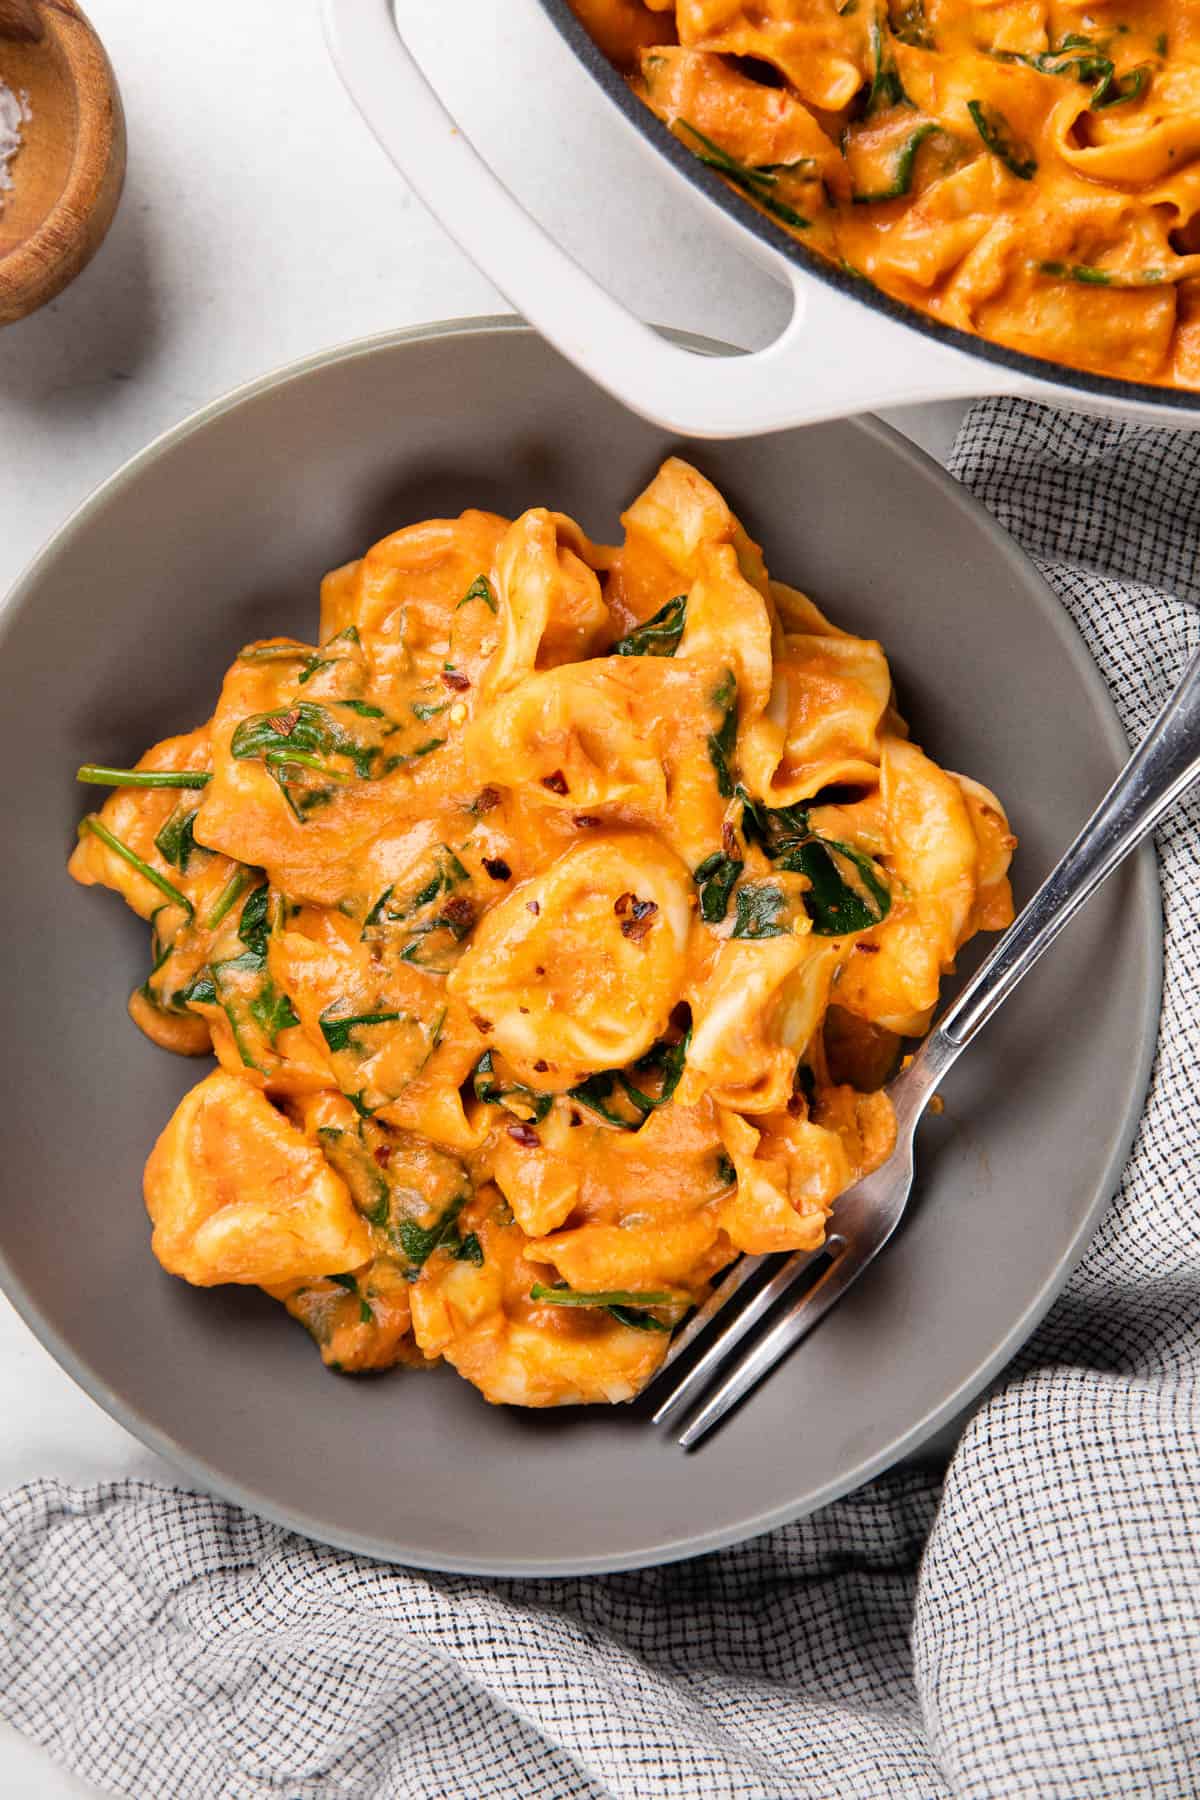 Tortellini in creamy tomato sauce in a grey bowl with a fork.